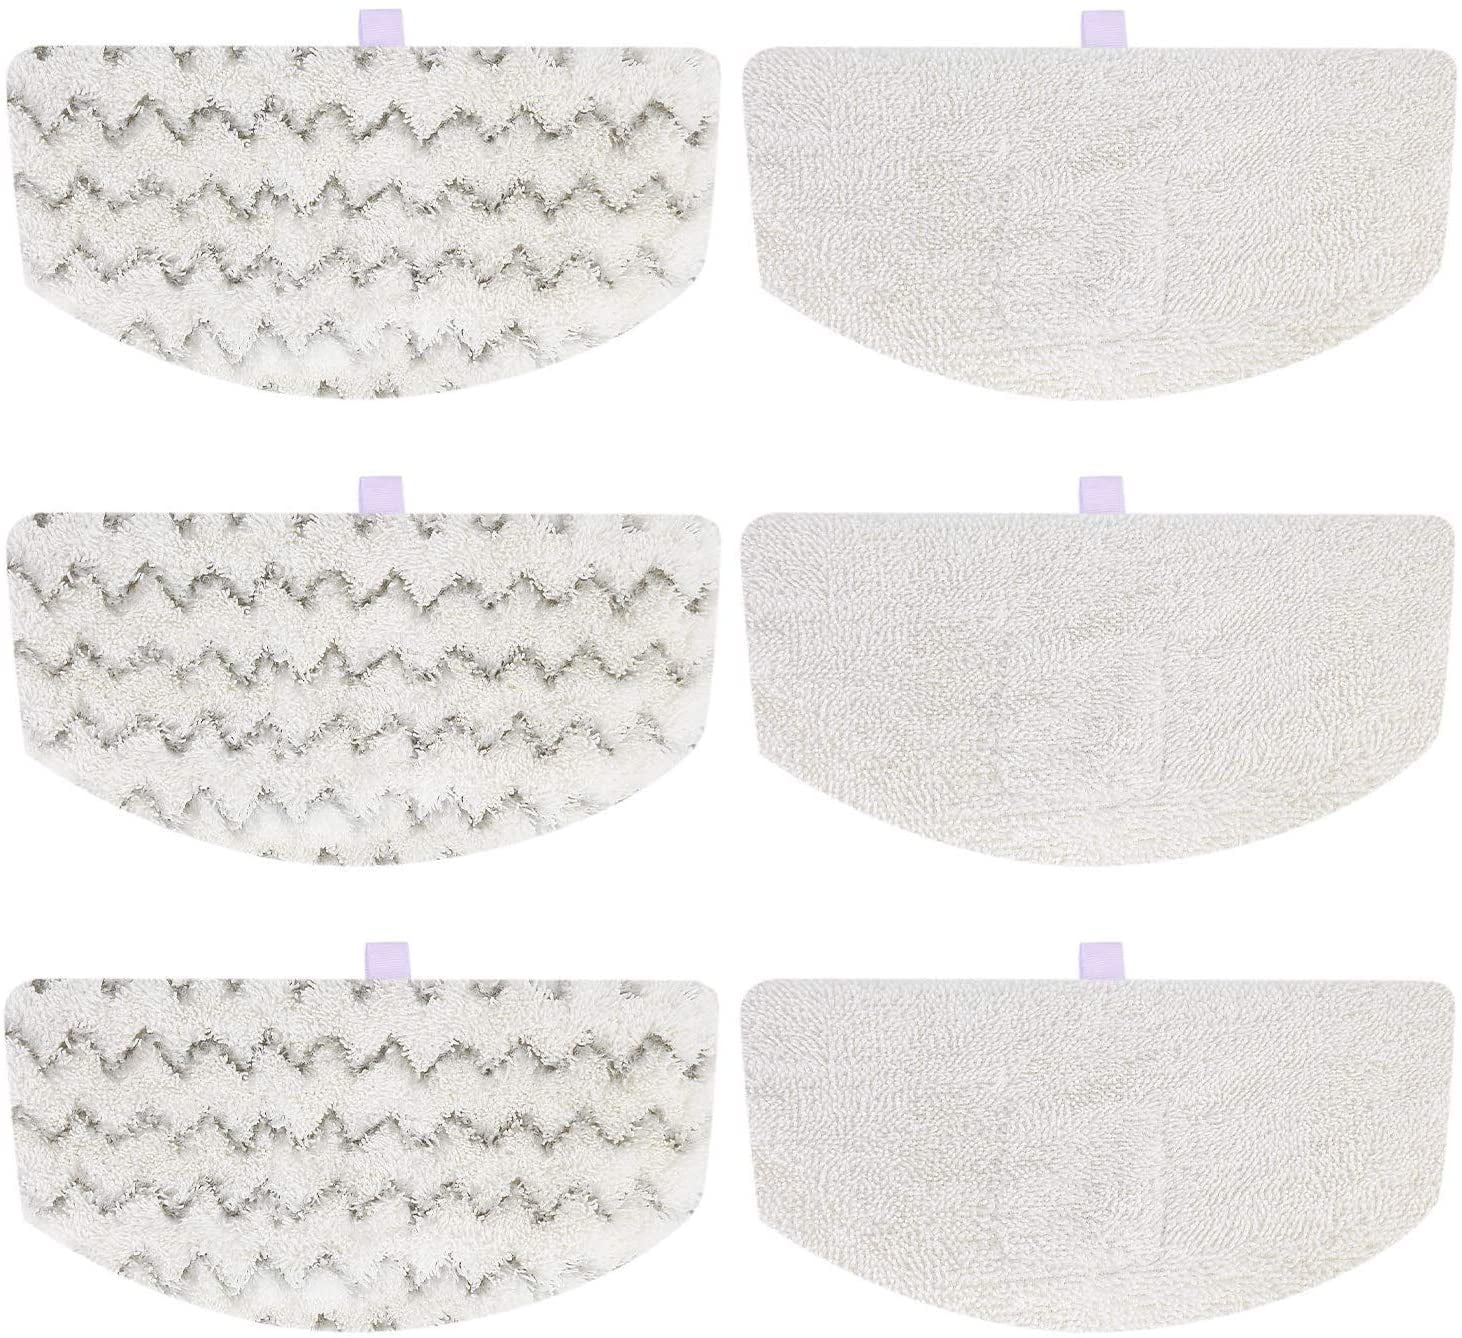 4 Pack Replacement Pad for Bissell Steam Mop Pad 1867 203-2158 3255 